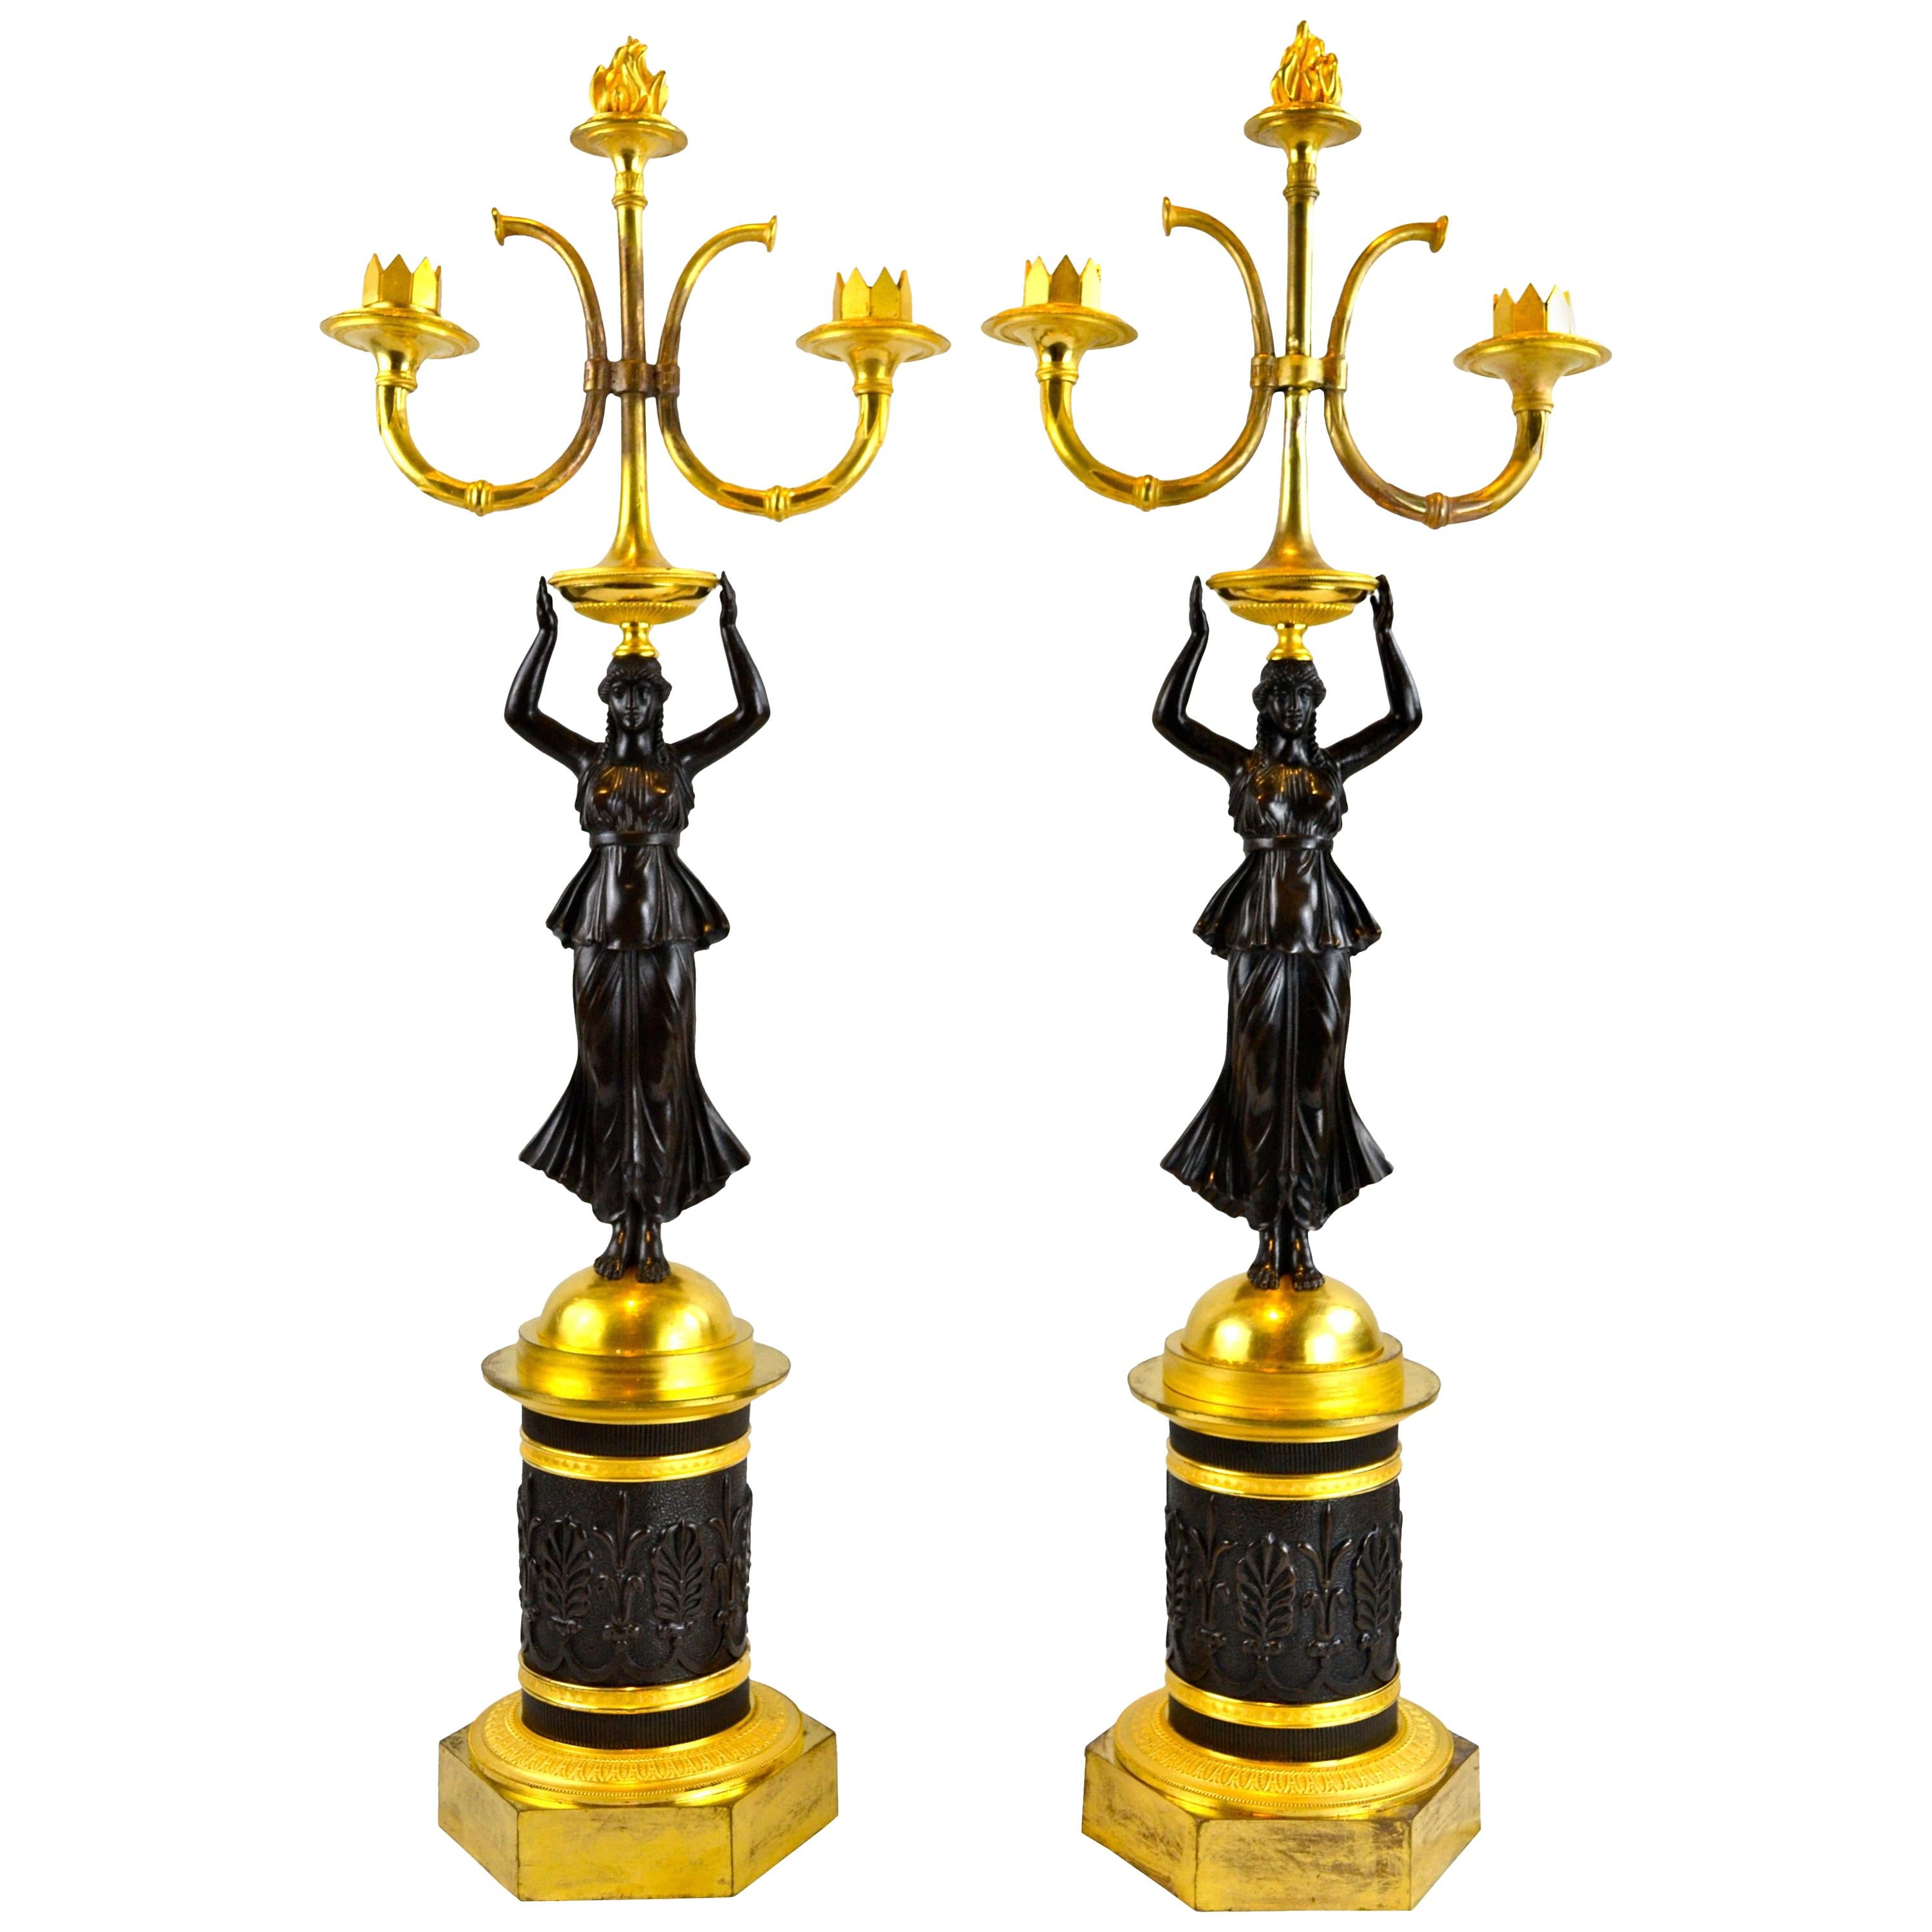 Pair of 19 Century Russian Empire Figural Gilt and Patinated  Bronze Candelabra For Sale